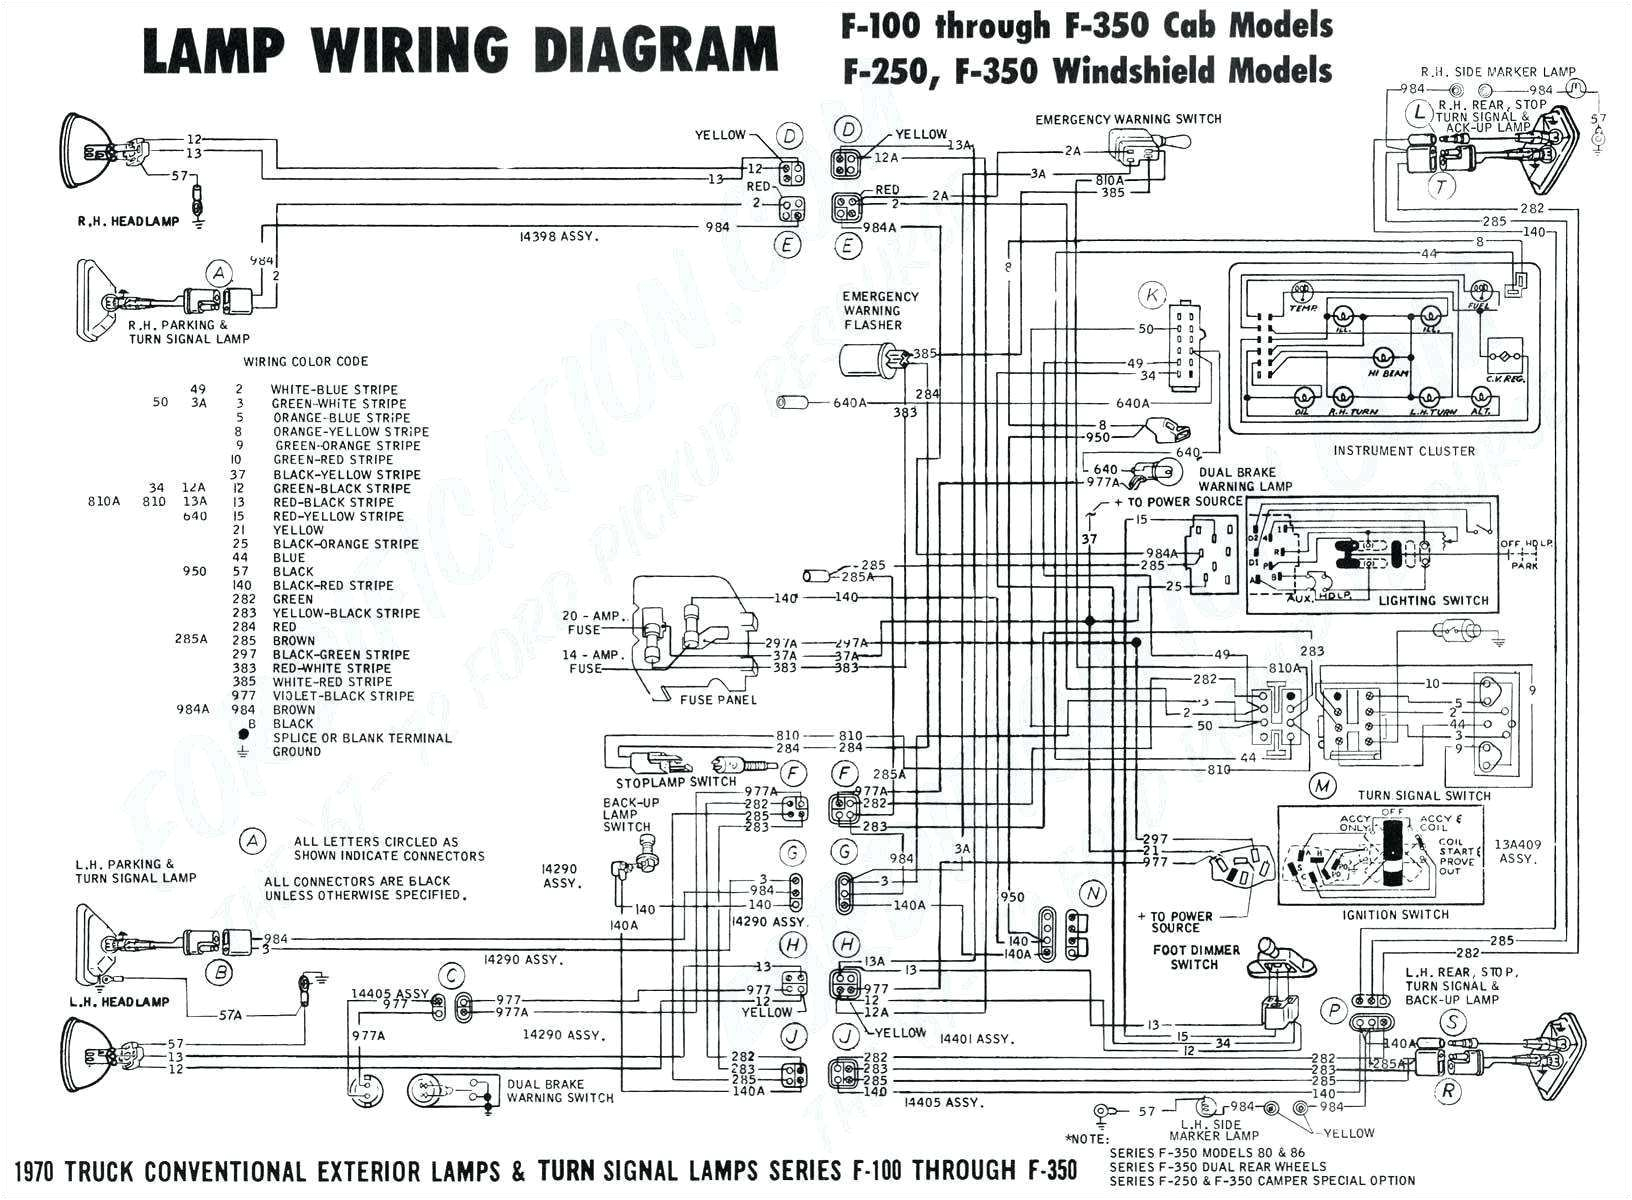 wiring diagram for lights does this look right second wiring wiring diagram for lights does this look right second